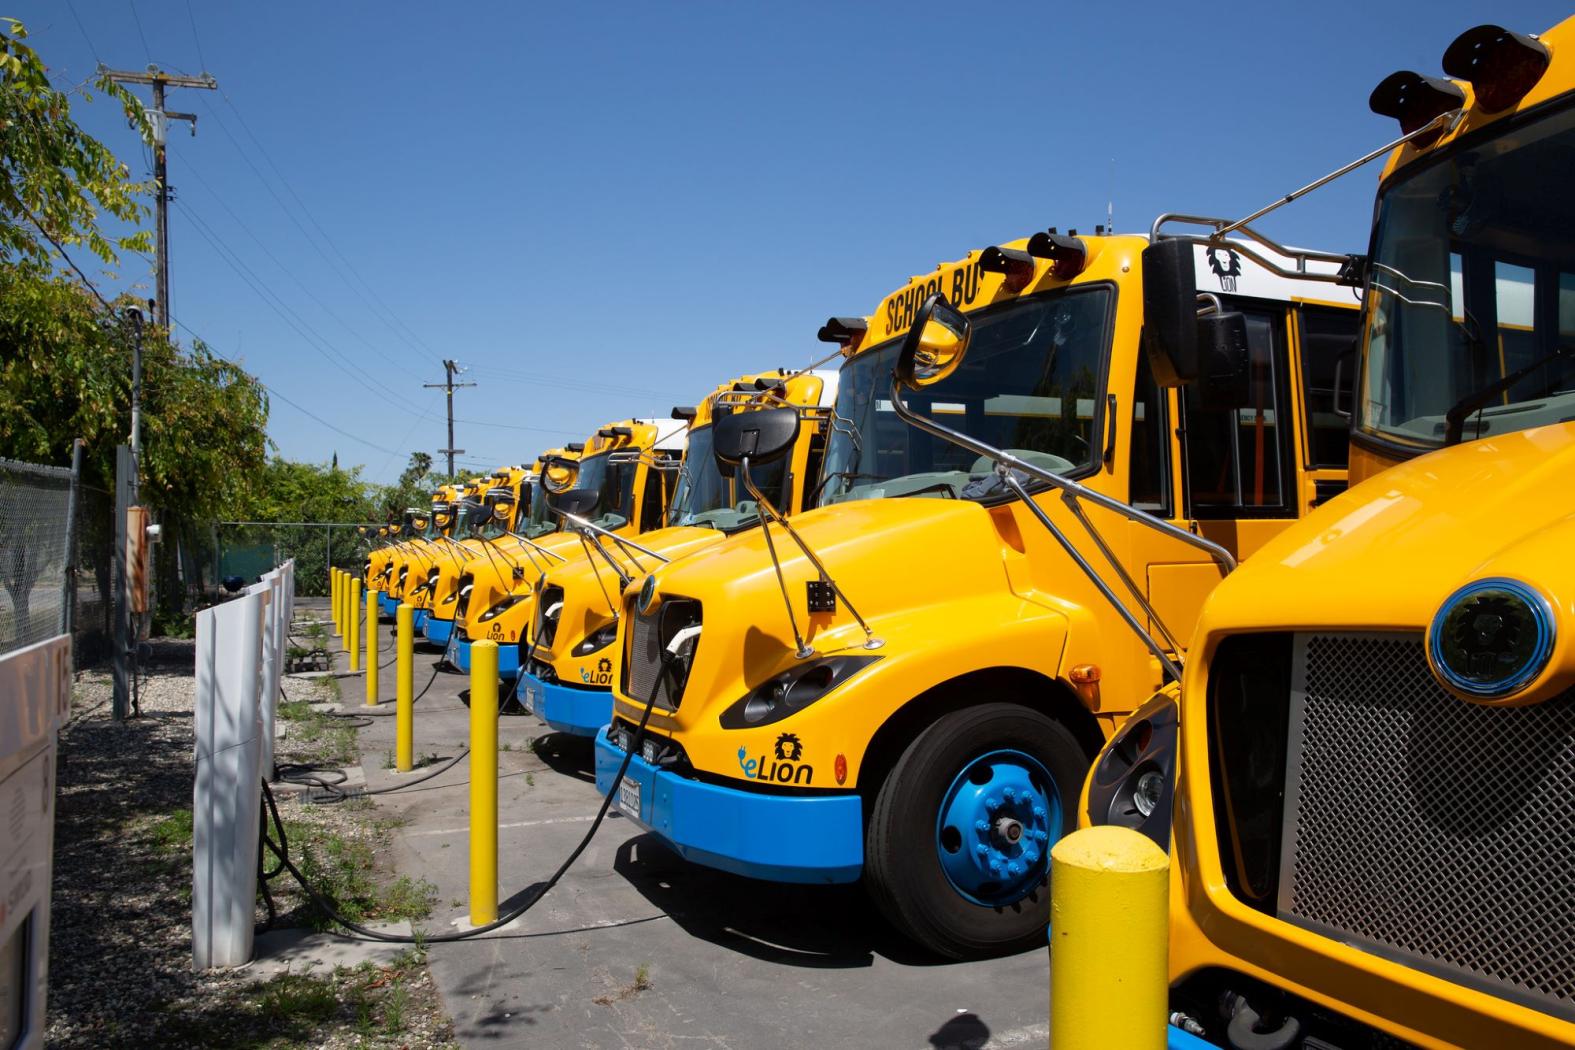 lectric buses in California’s Twin Rivers School District fleet are plugged in to charge. For large public vehicle fleets, determining where to install EV chargers can be one of the biggest hurdles to electrification. Photo by California Energy Commission/Flickr